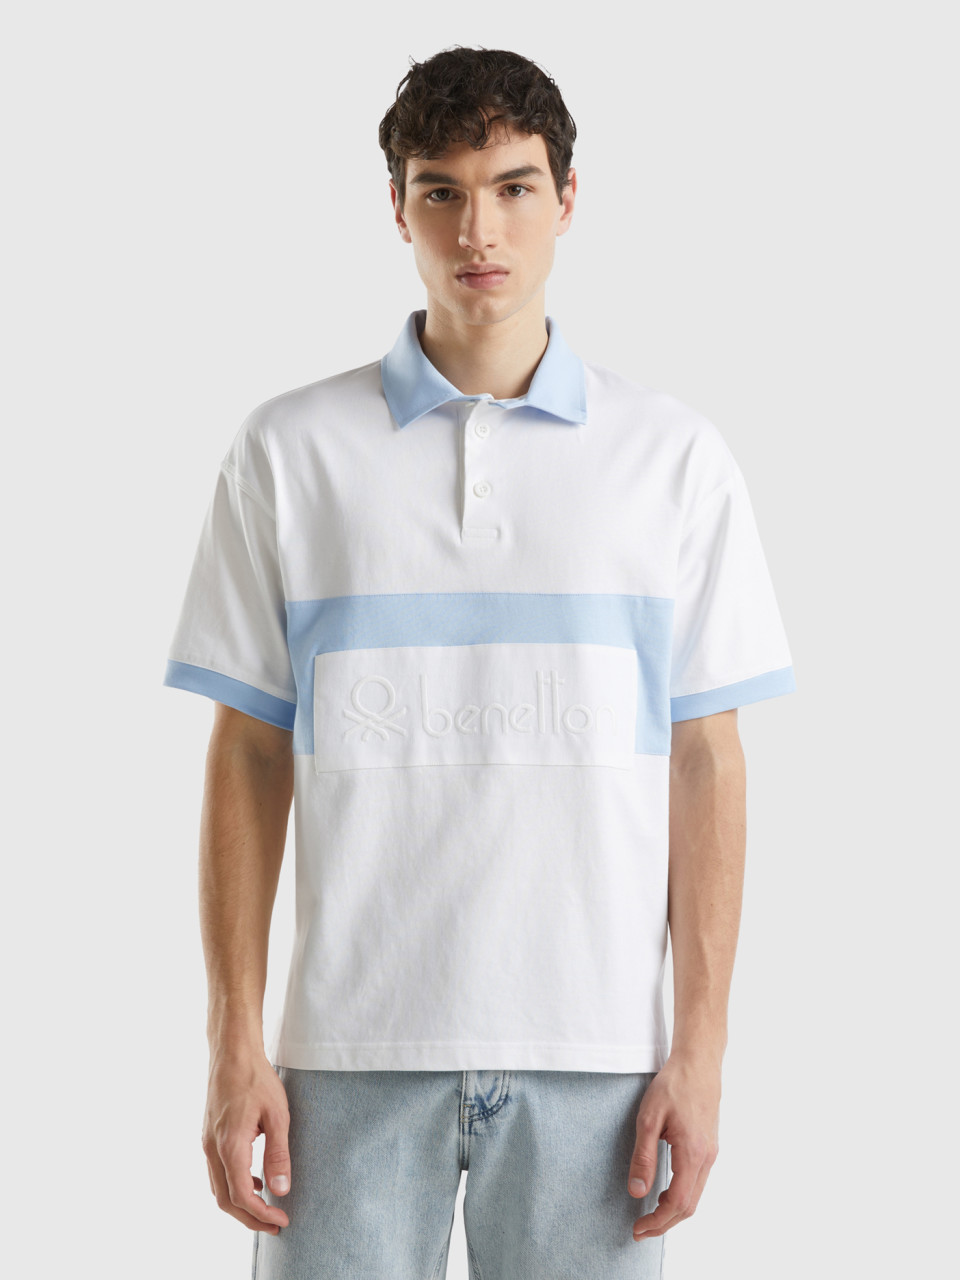 Benetton, White And Sky Blue Rugby Polo, Multi-color, Men